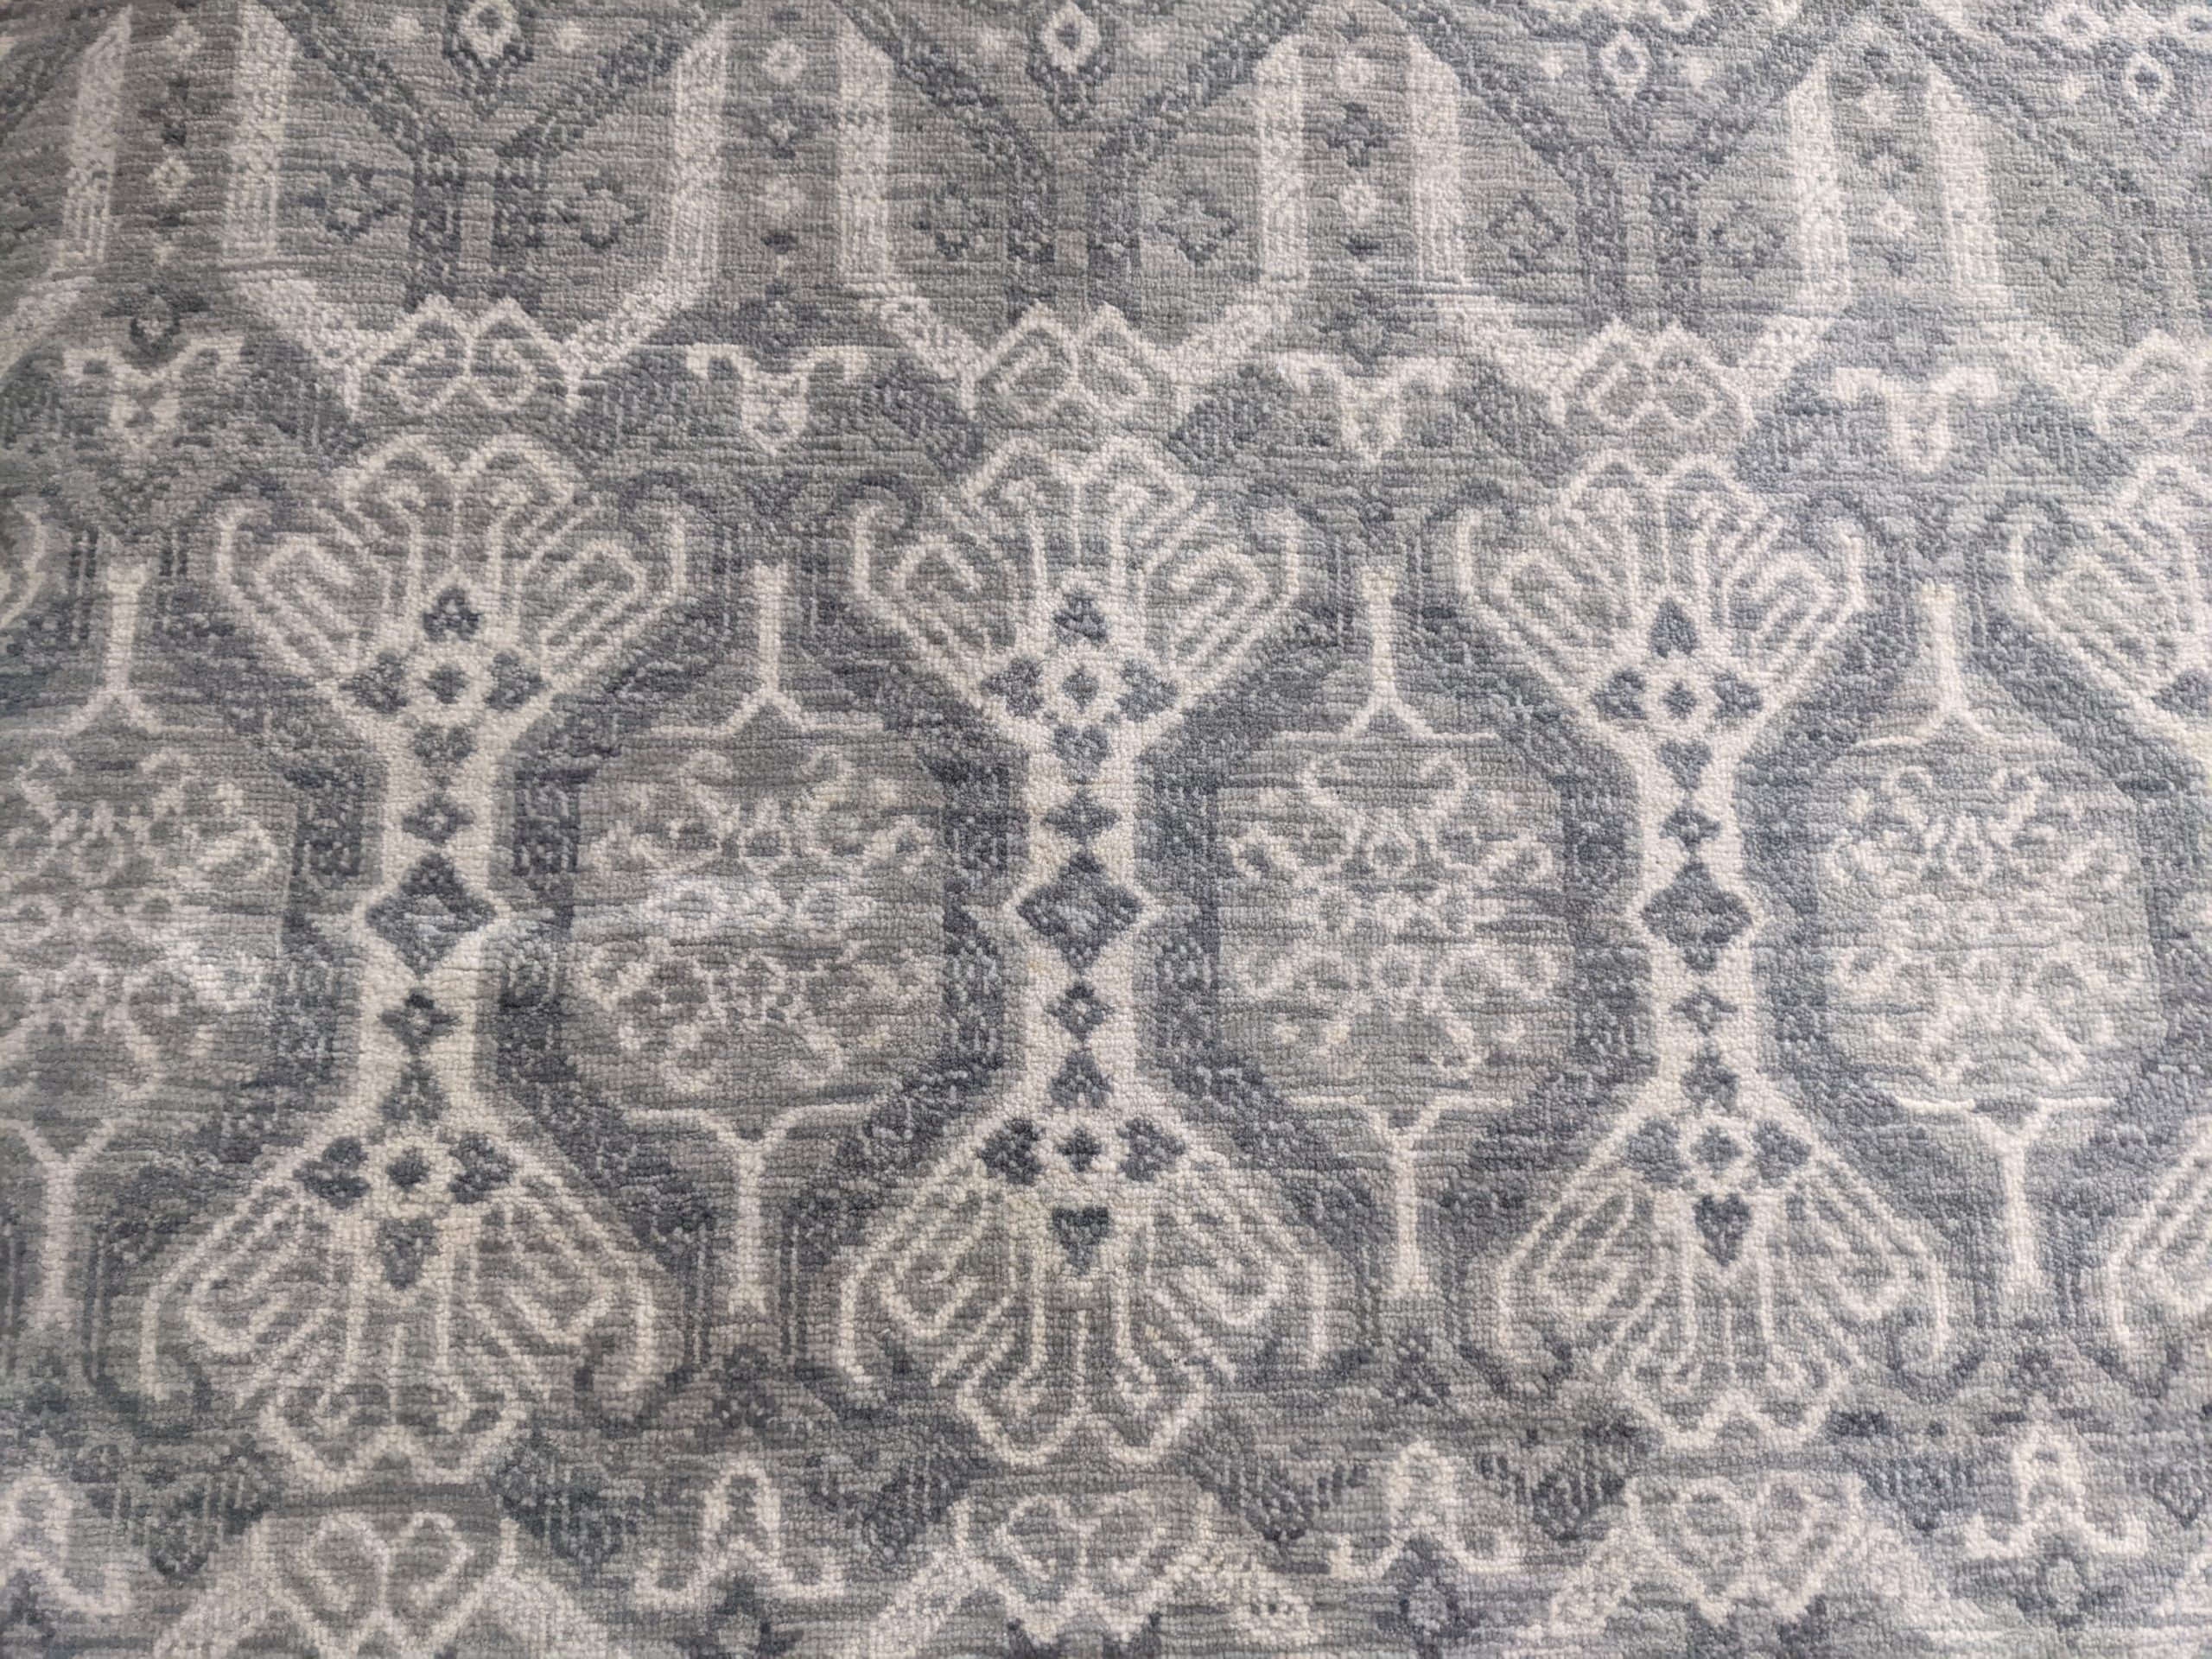 Ikat-Style Hand-Knotted Rug